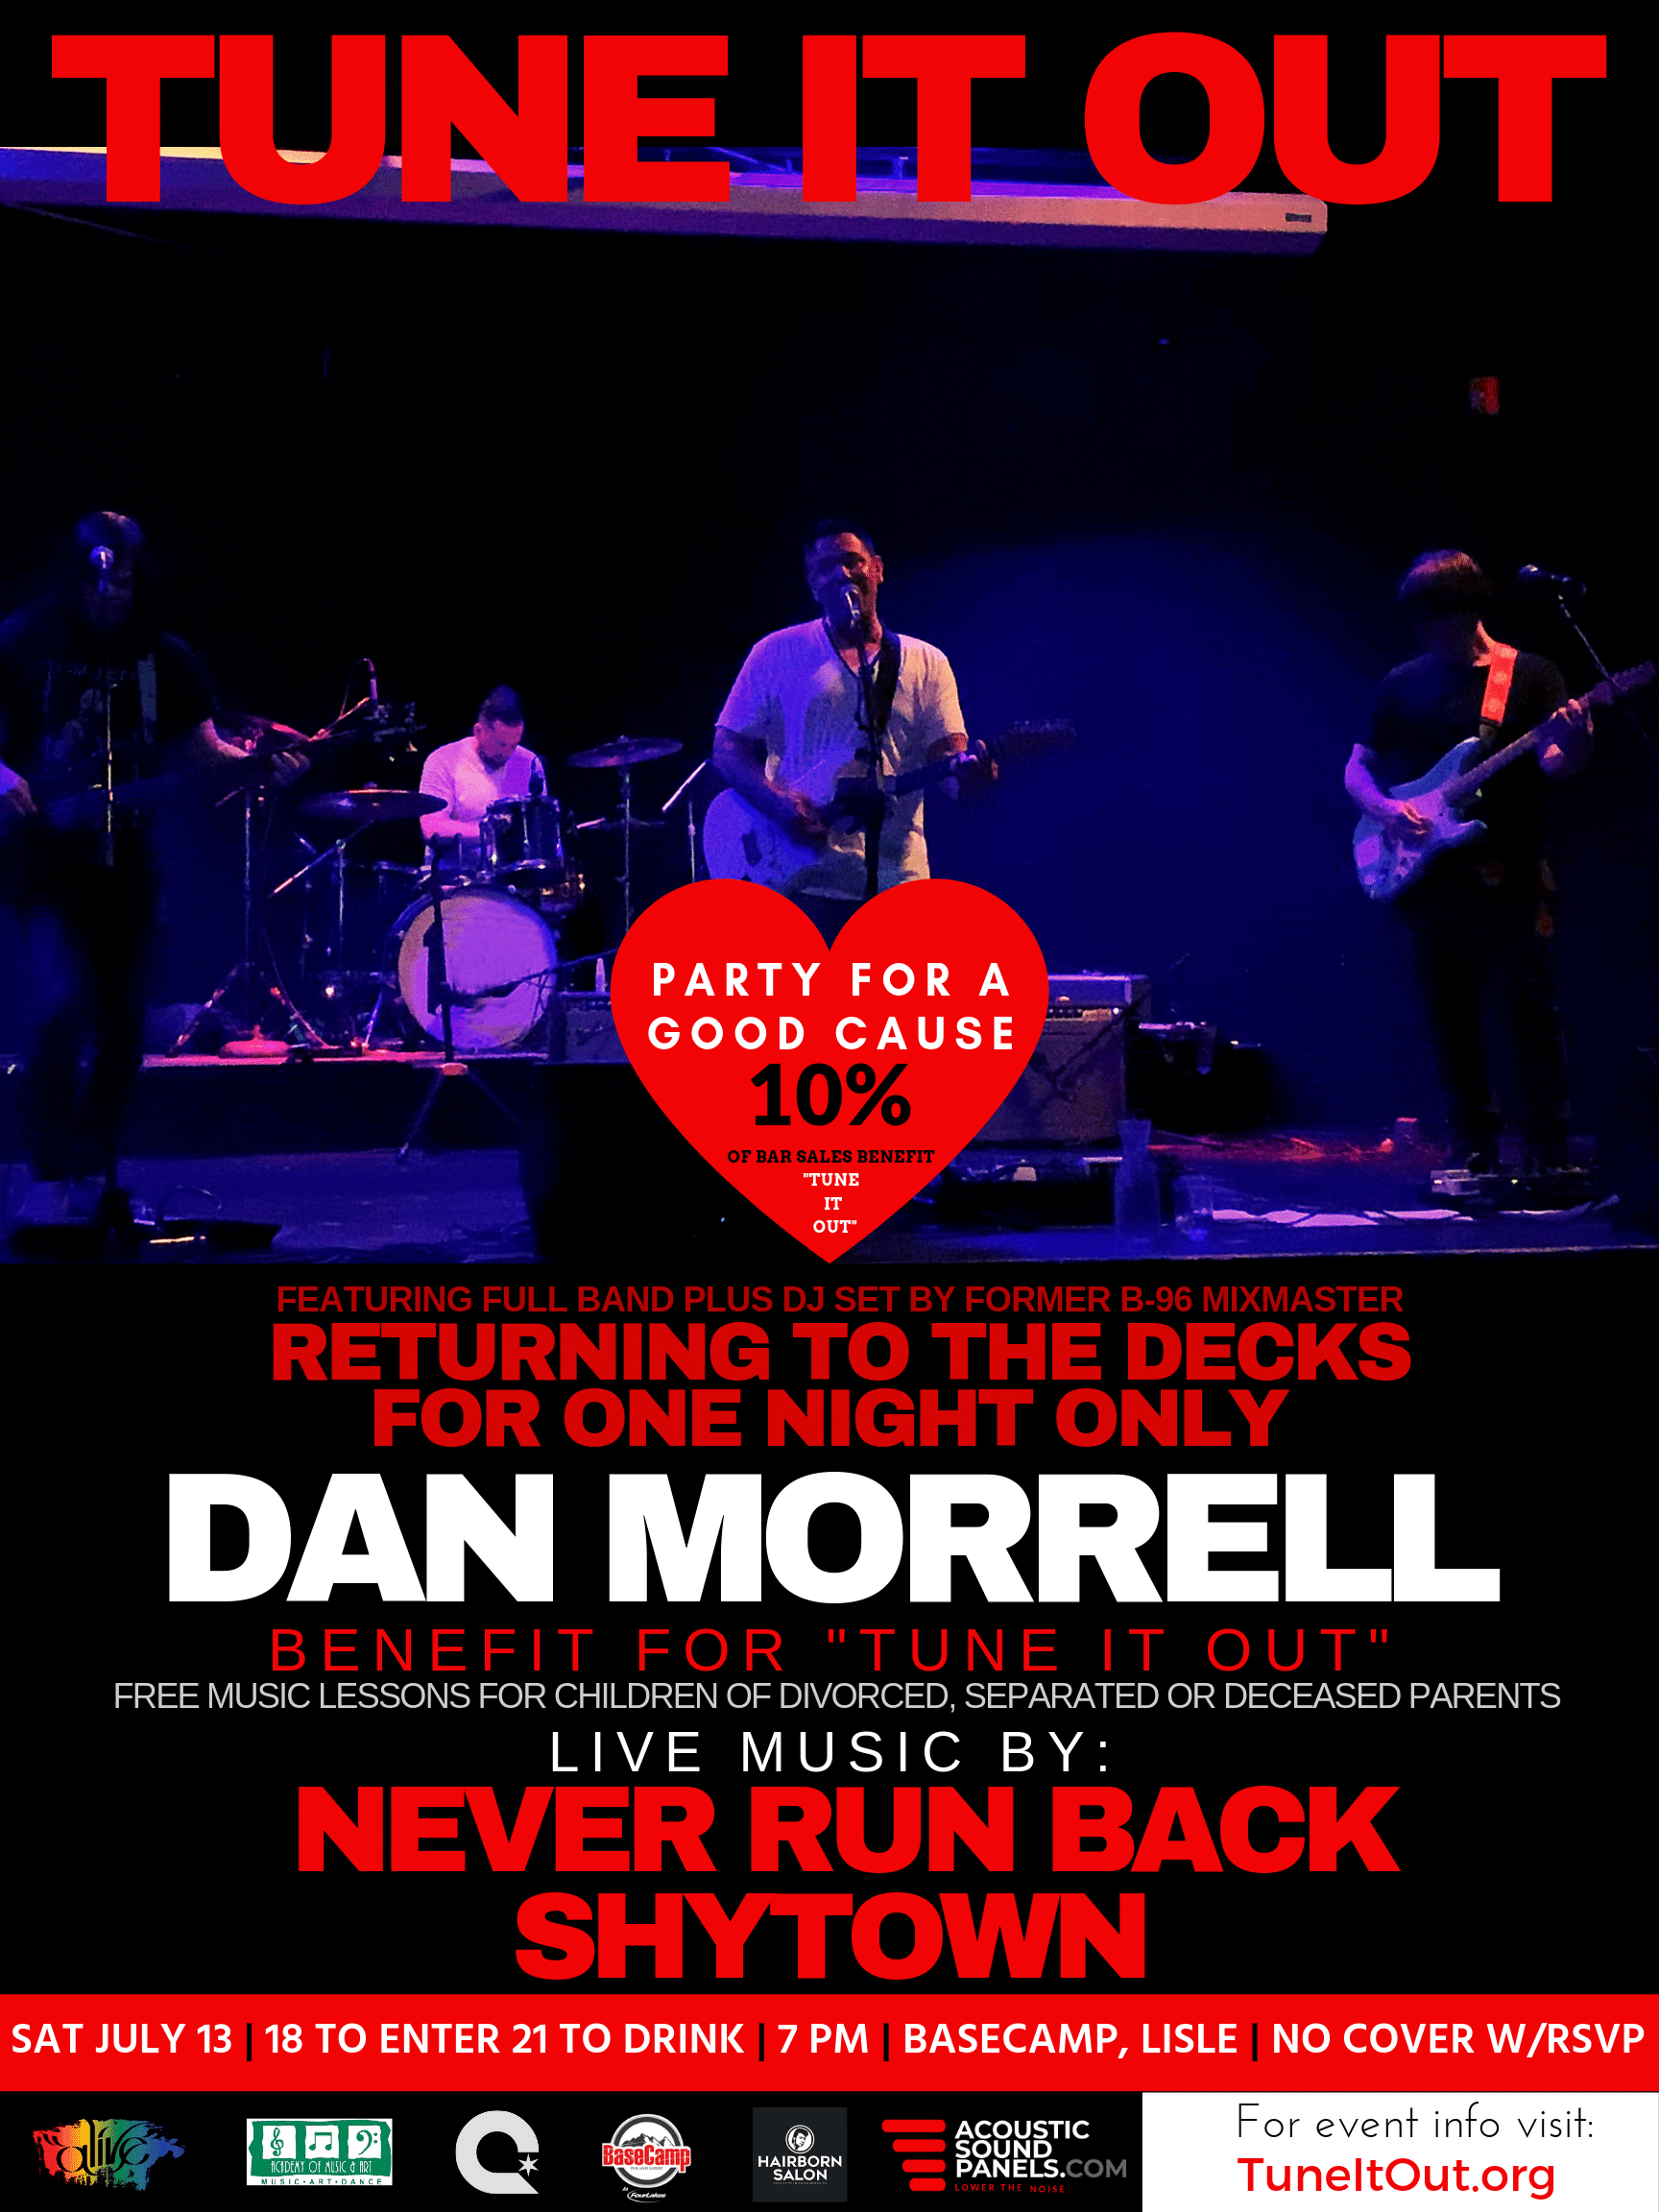 Former B96 Mixmaster Dan Morrell is coming out of “DJ Retirement” for ONE Night Only for charity. Immediately following a full band set by Dan’s band “Never Run Back” the lead singer / guitarist will keep the party going by mixing a set of classic feel good party music that he is known for.